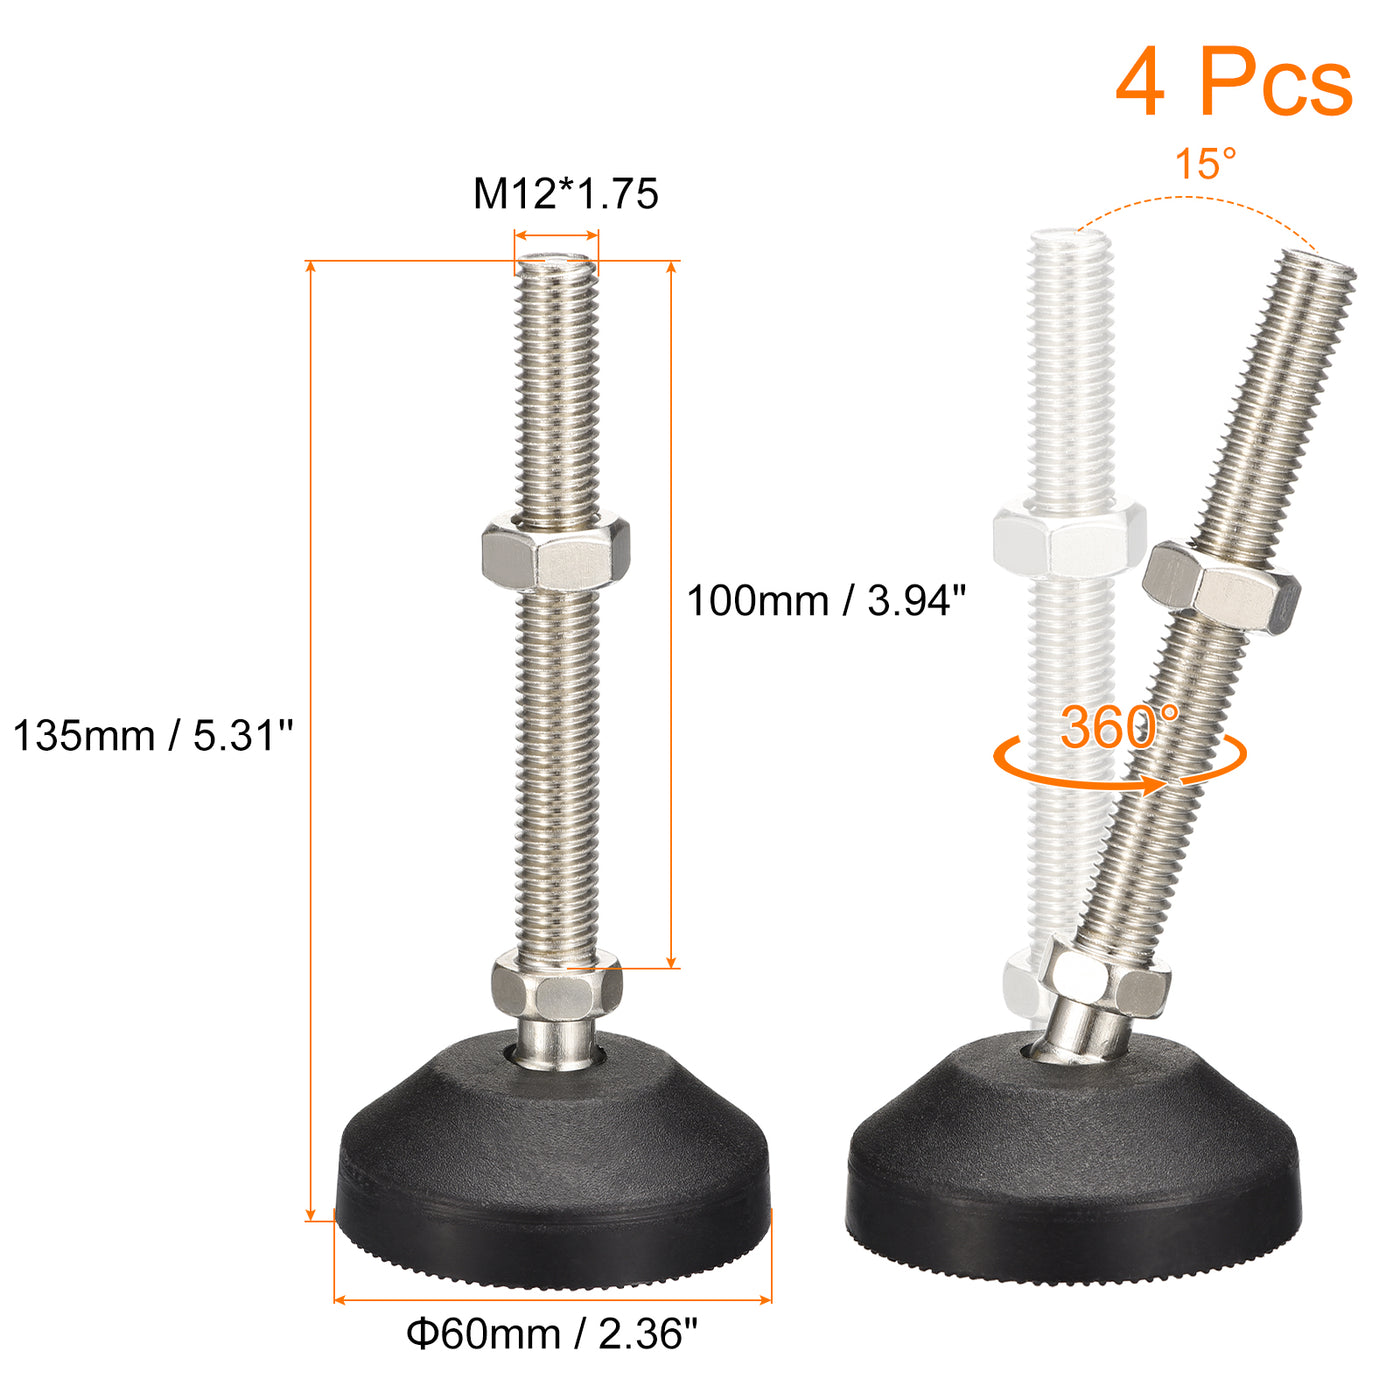 uxcell Uxcell Furniture Levelers, 4Pcs M12x100x60mm Nylon Universal Leveling Feet, Adjustable Swivel Table Feet for Furniture Workshop Machines Machinery Equipment